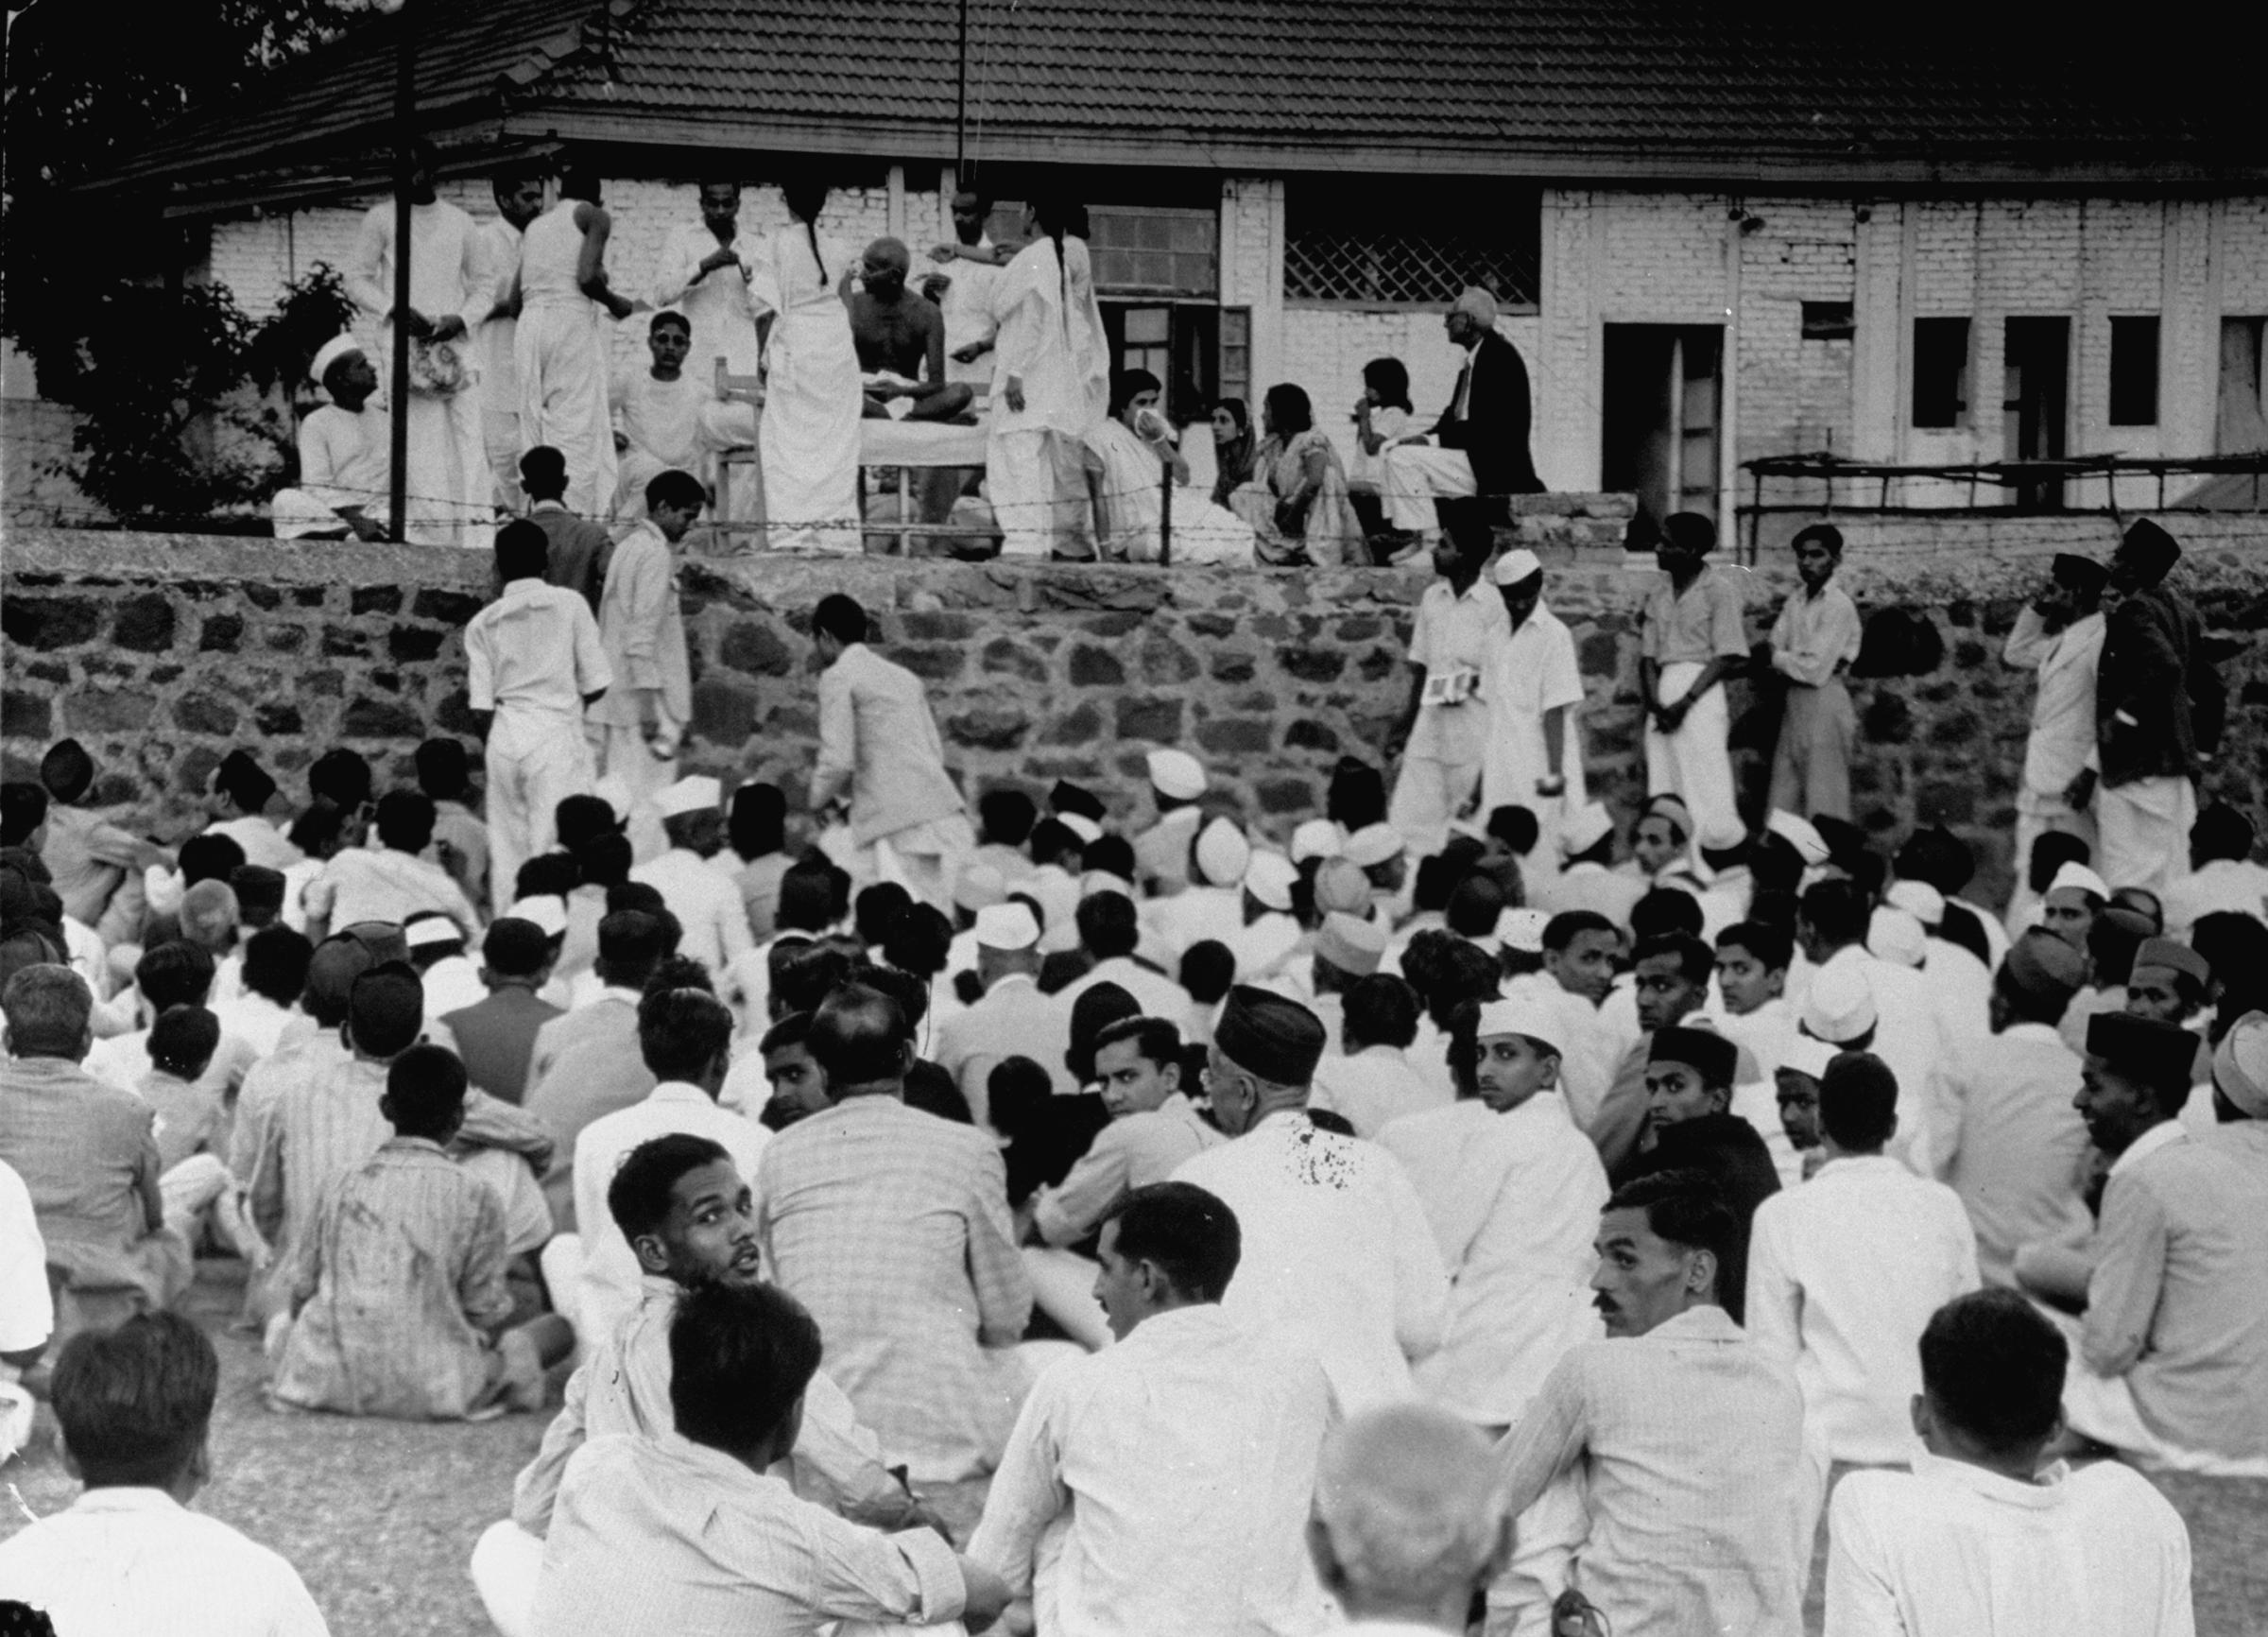 In 1946, Gandhi (seated on a bed at top) leads evening prayers surrounded by his devoted disciples and followers.